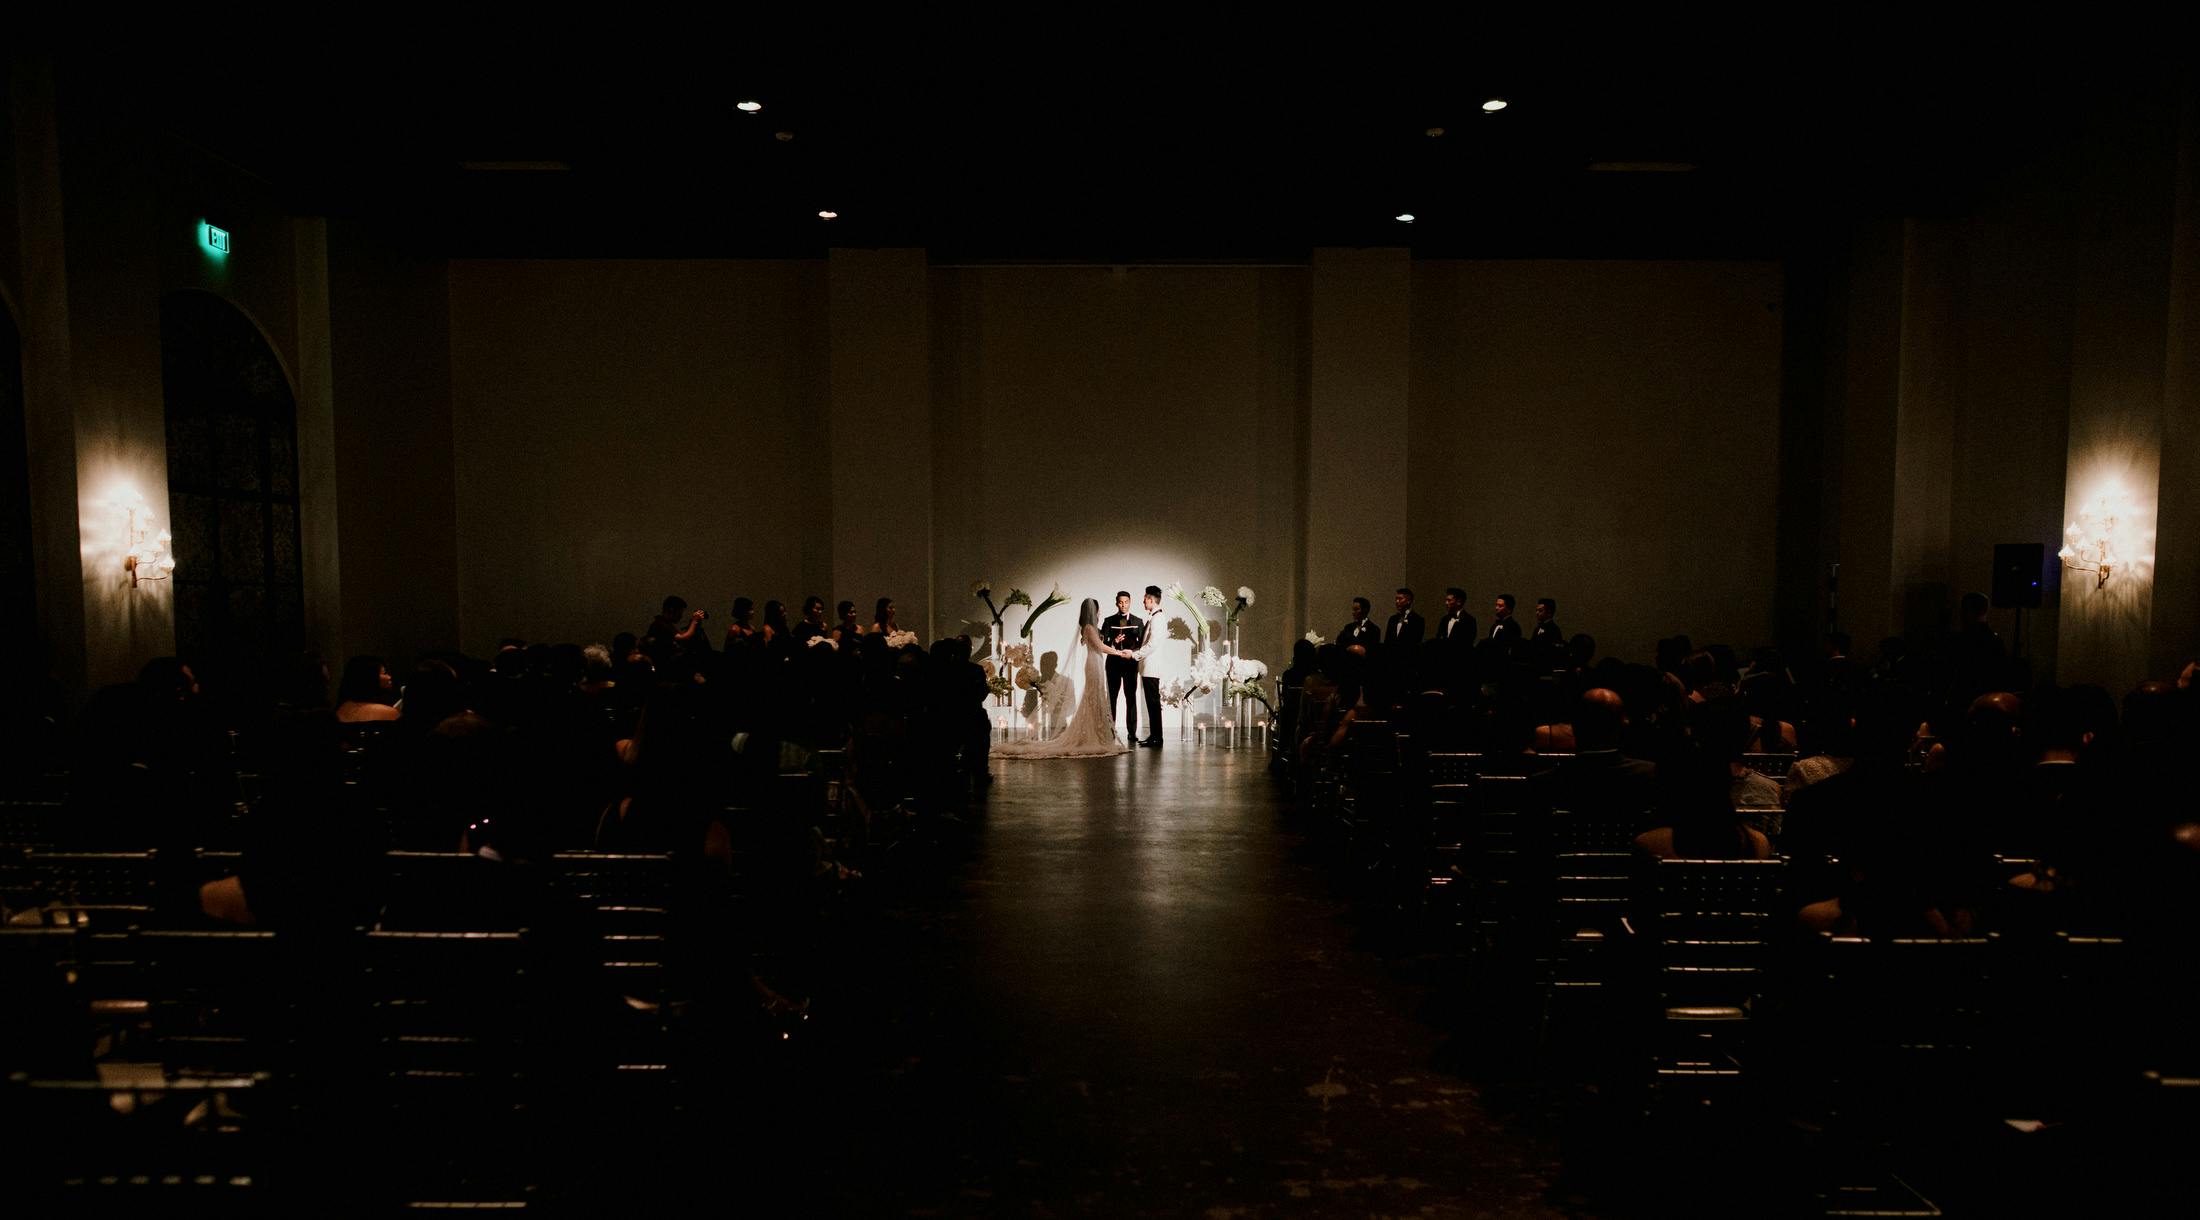 Dimmed Wedding Ceremony With Spotlight Shining on Couple | PartySlate